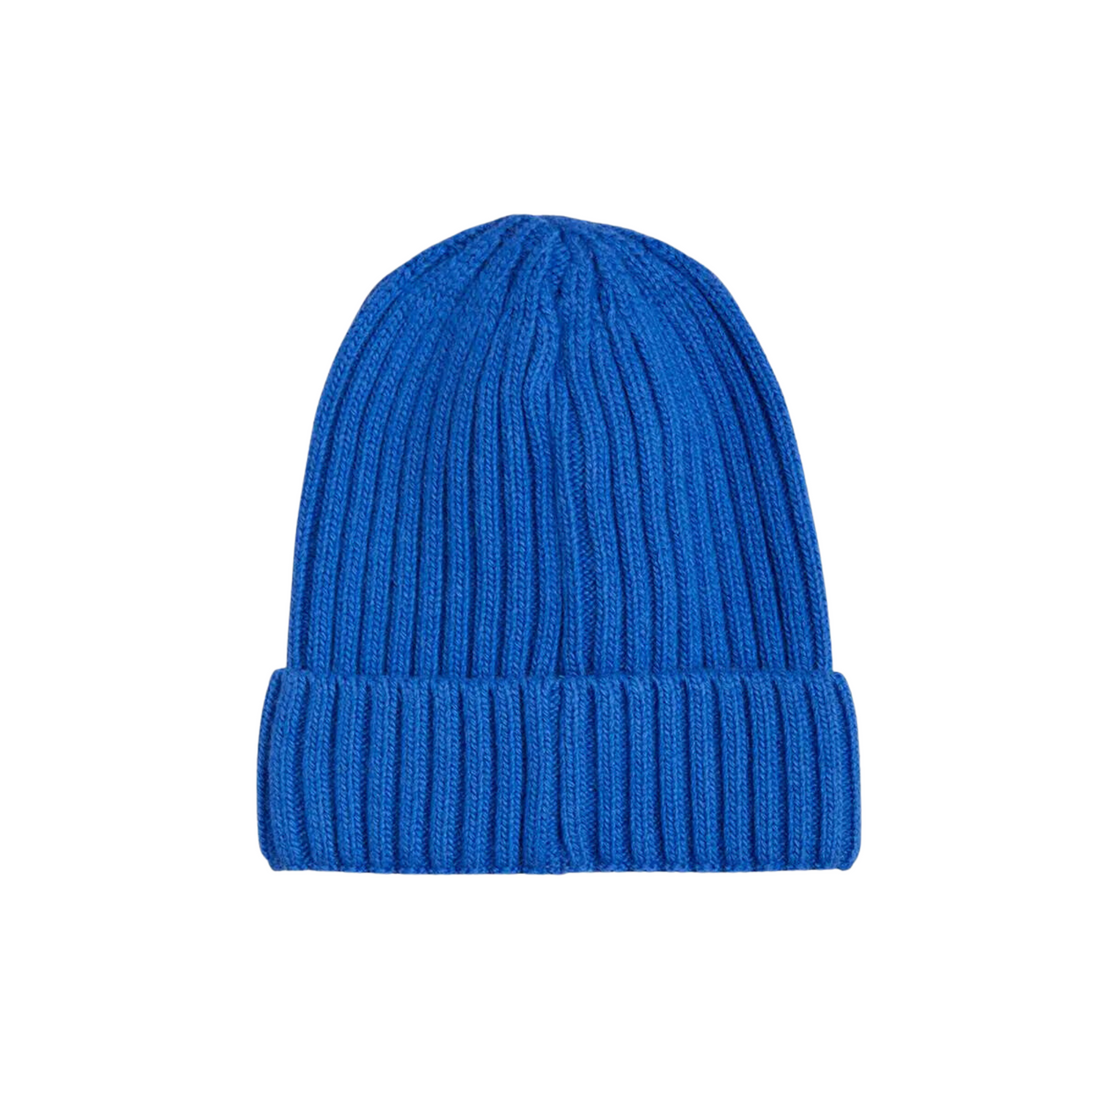 Wool Knitted hat - Blue